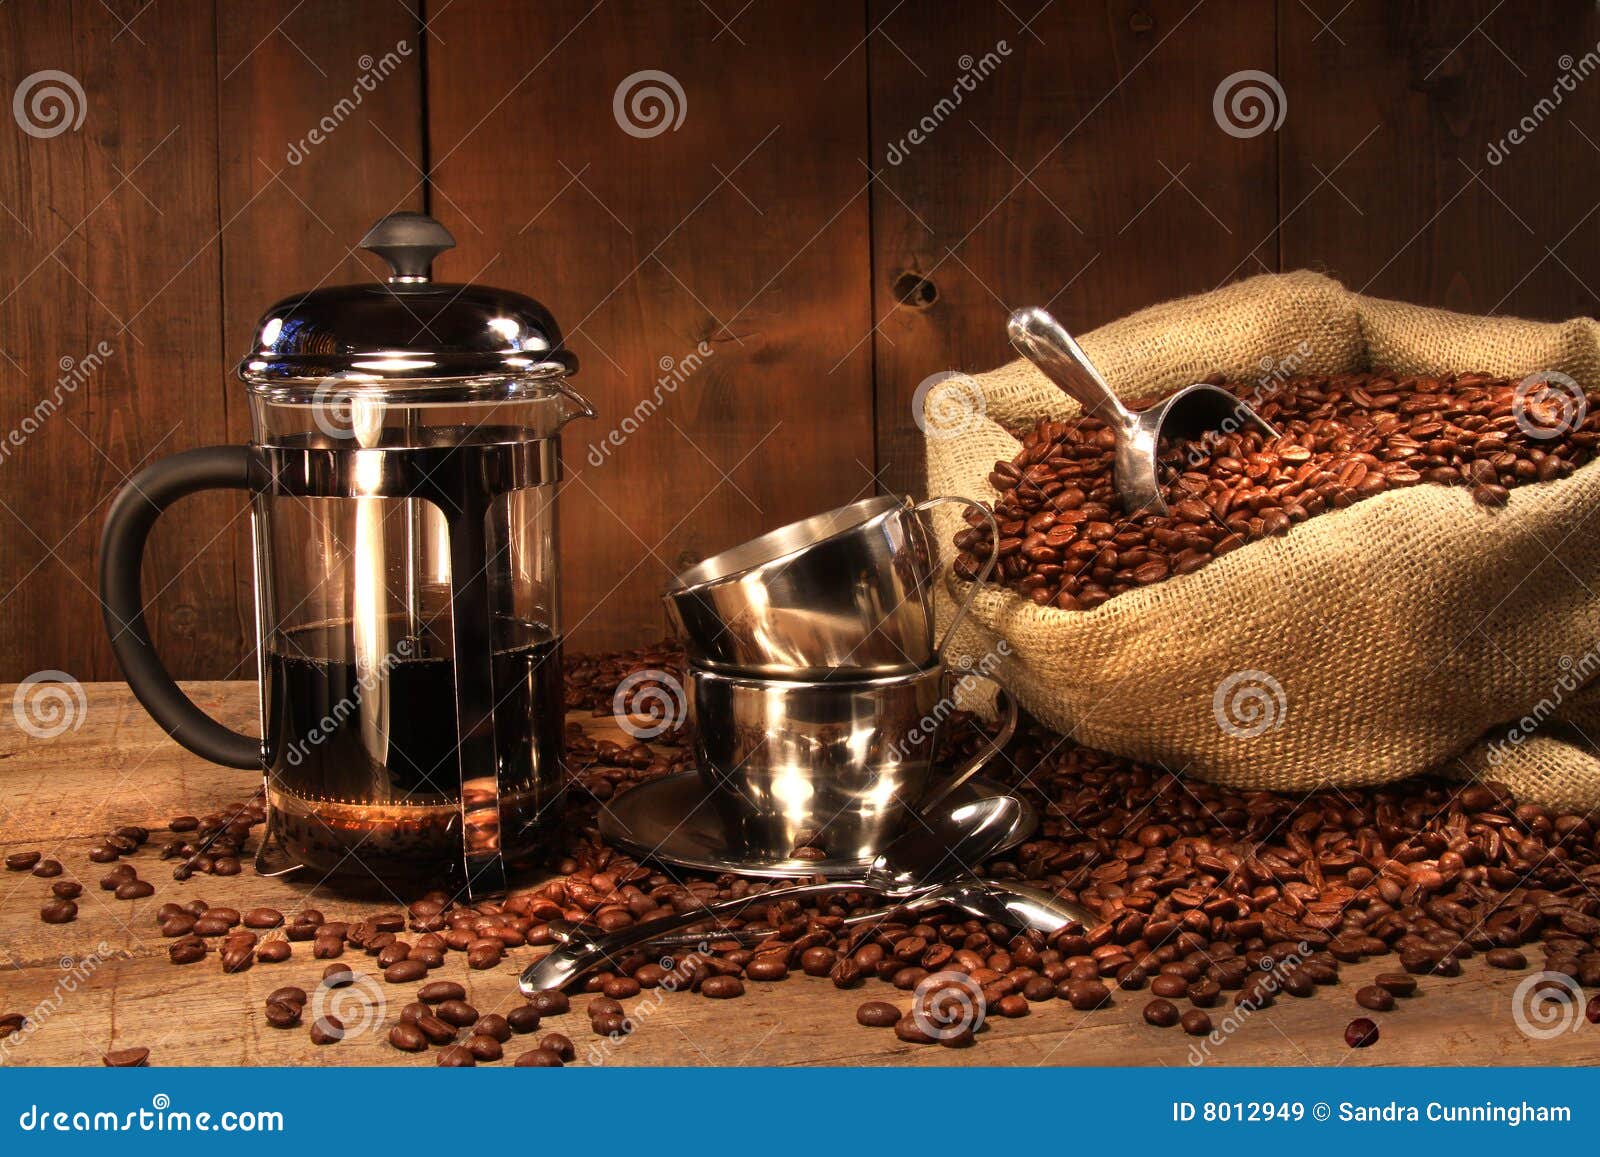 sack of coffee beans with french press